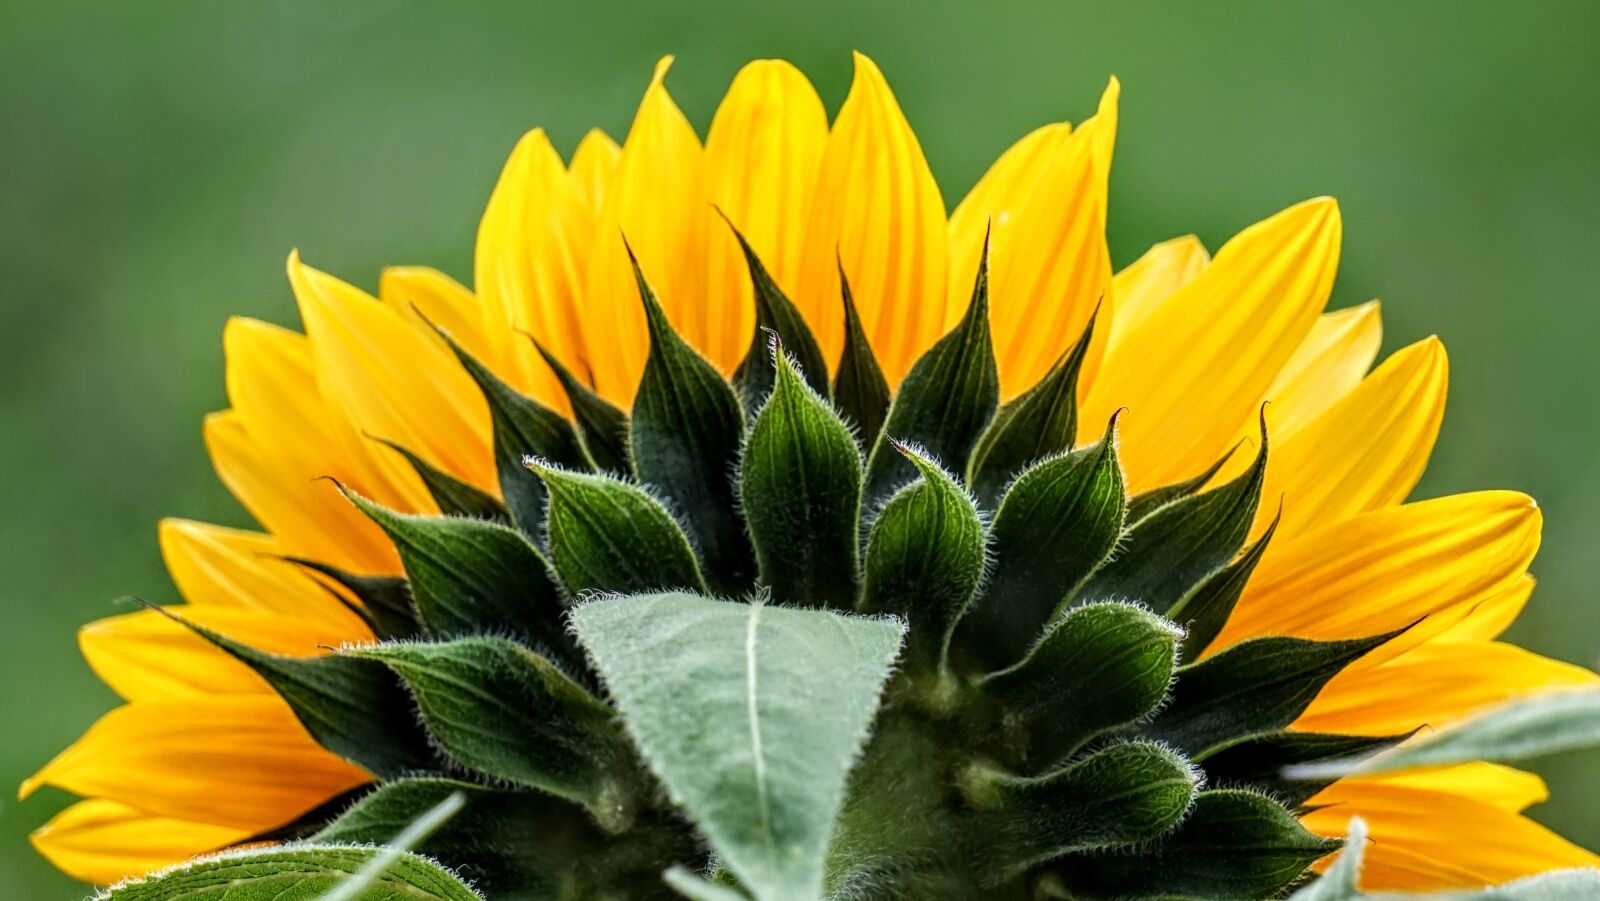 Sony a7 sample photo. Sunflower, nature, yellow photography